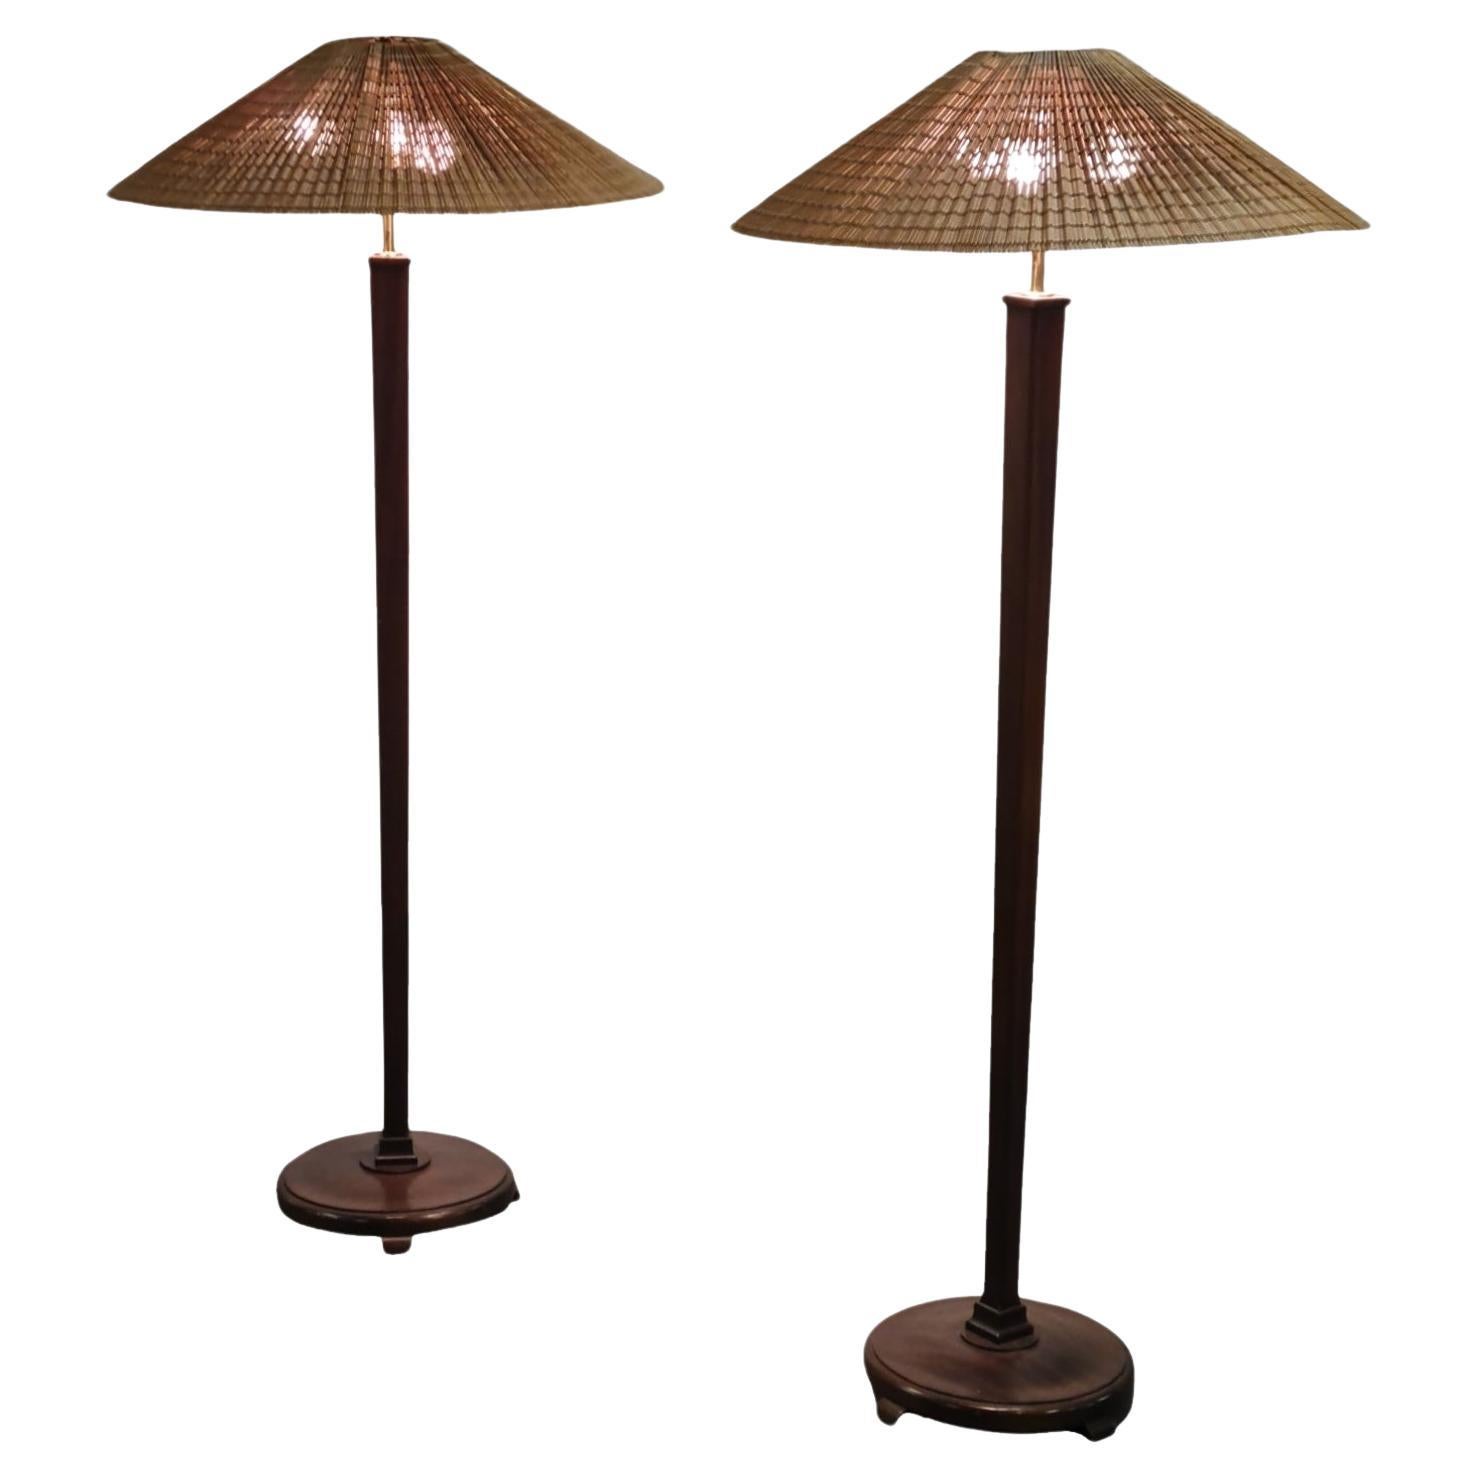 Unique pair of Paavo Tynell / Paul Boman floor lamps, Taito / Boman